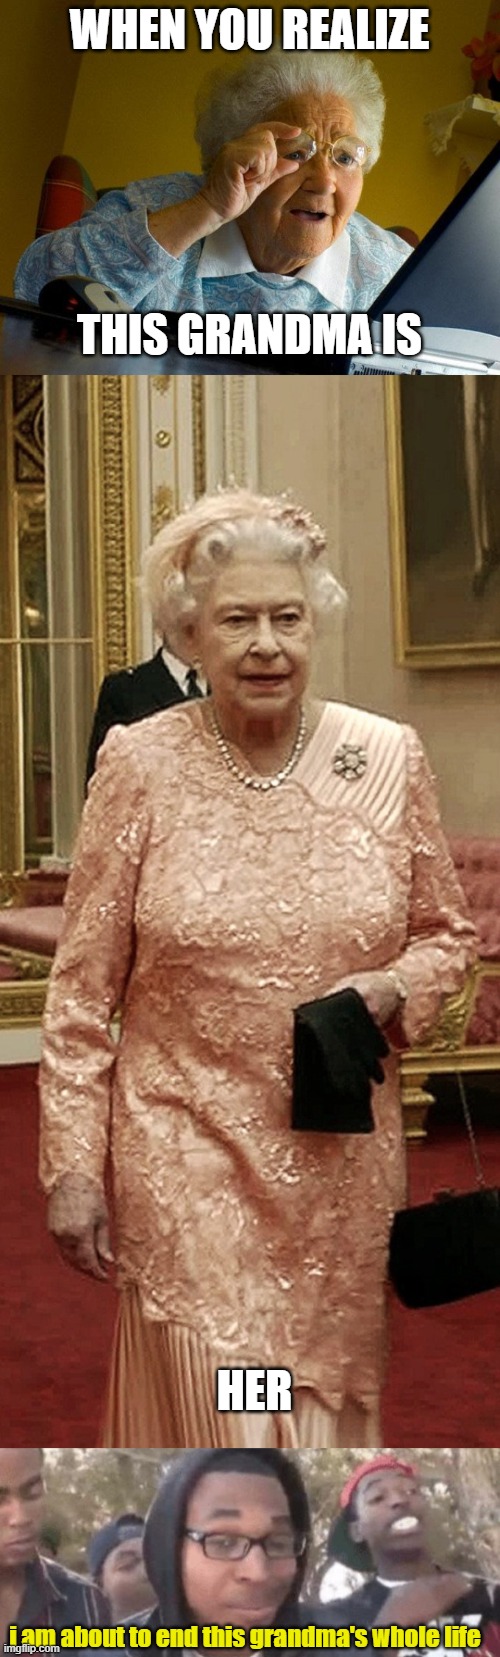 your grandma is Queen Elizabeth II | WHEN YOU REALIZE; THIS GRANDMA IS; HER; i am about to end this grandma's whole life | image tagged in memes,grandma finds the internet,queen elizabeth james bond 007,i am about to end this man s whole career | made w/ Imgflip meme maker